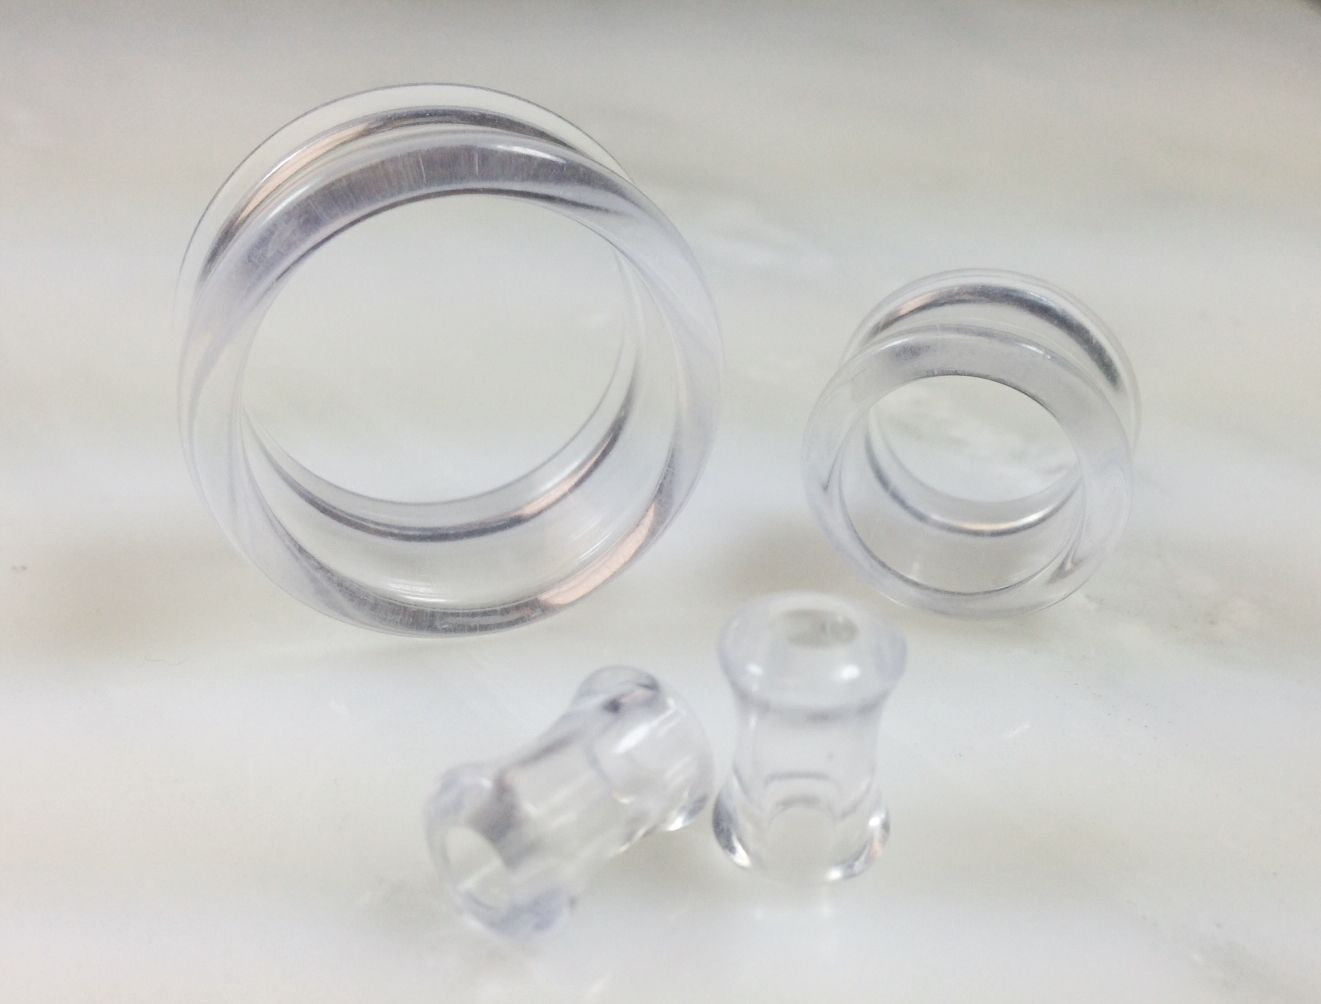 Solid Color Acrylic Tunnels 18mm thru 30mm - Pair